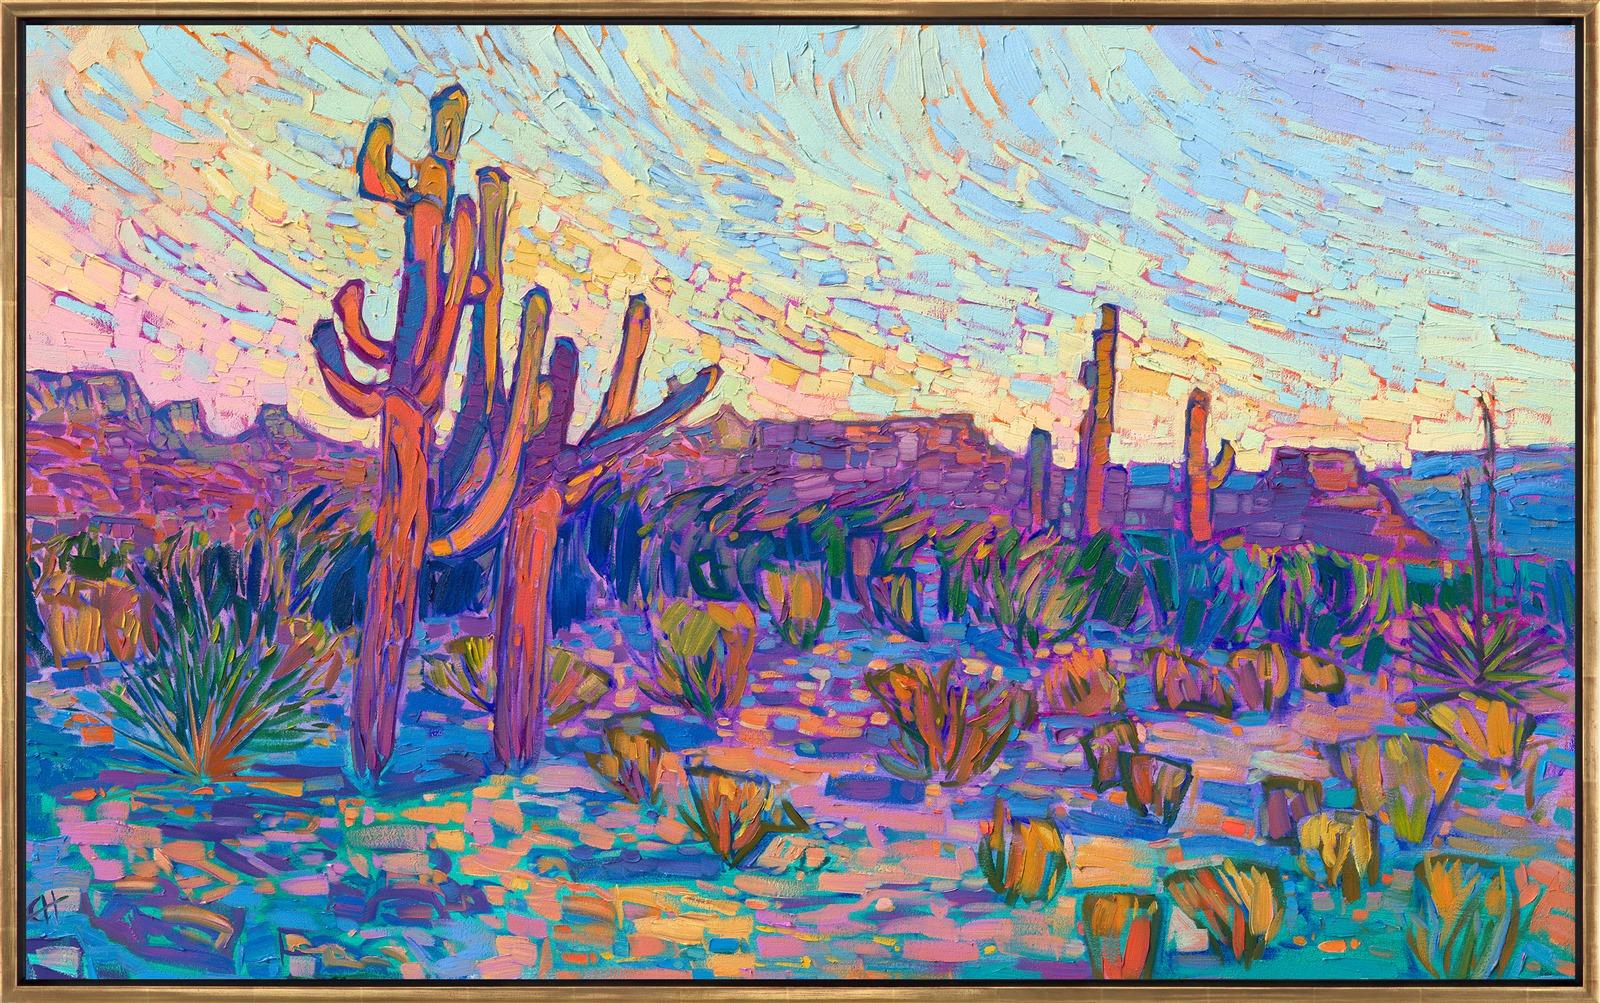 This painting of Arizona saguaros celebrates the vibrant colors of the southwest. The thick, impressionistic brush strokes create a mosaic of color and texture across the canvas, pulling your eye through the painting so that you become immersed in